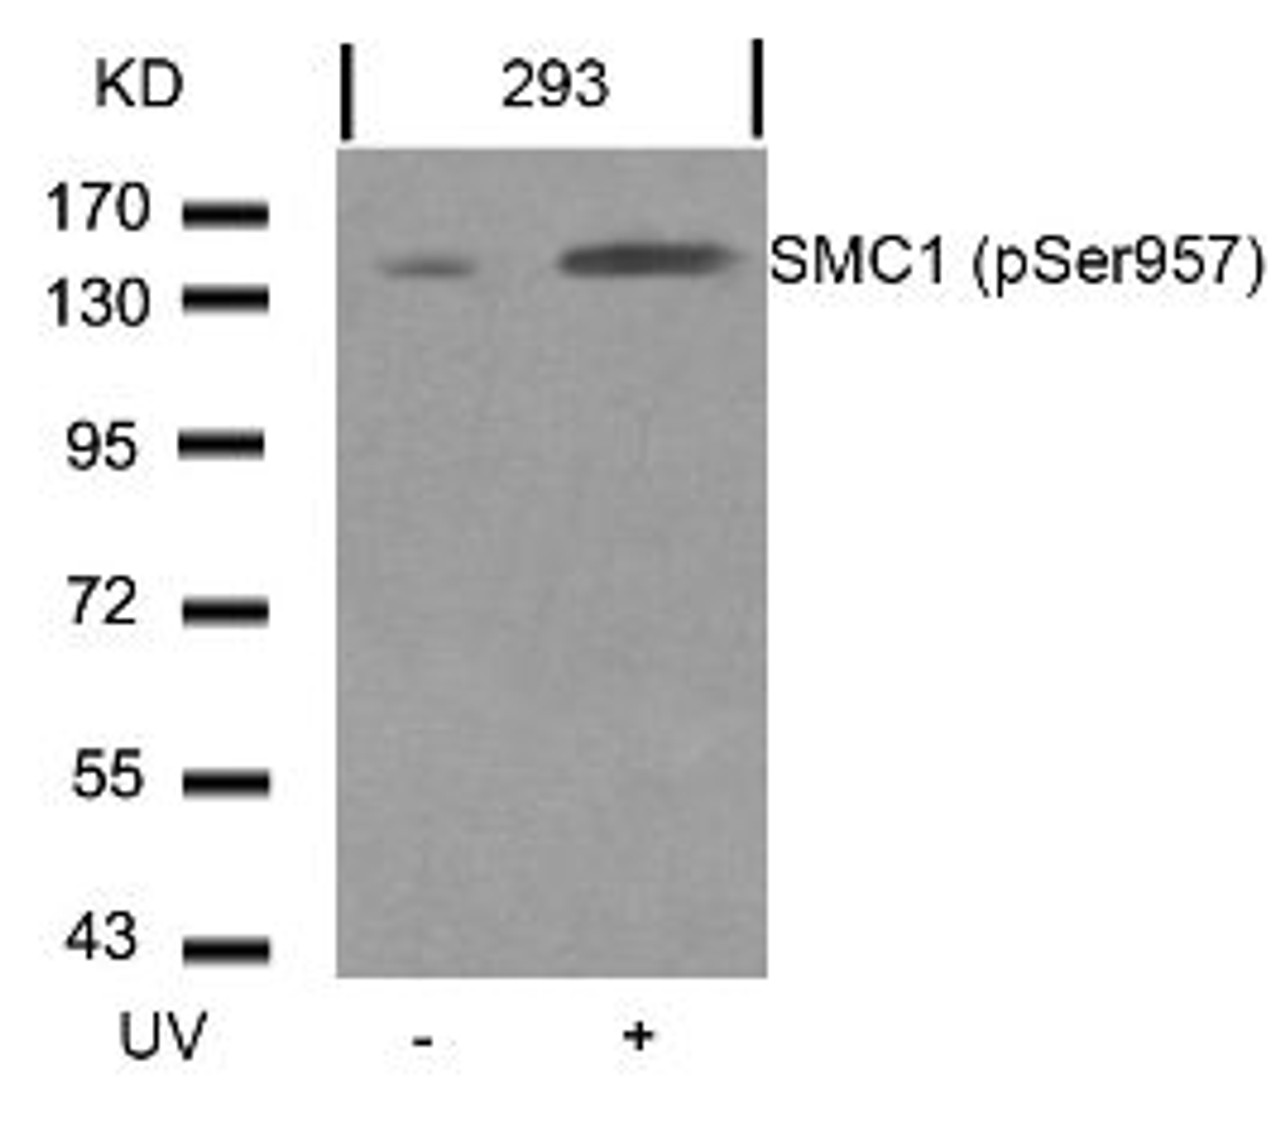 Western blot analysis of lysed extracts from 293 cells untreated or treated with UV using SMC1 (Phospho-Ser957) .